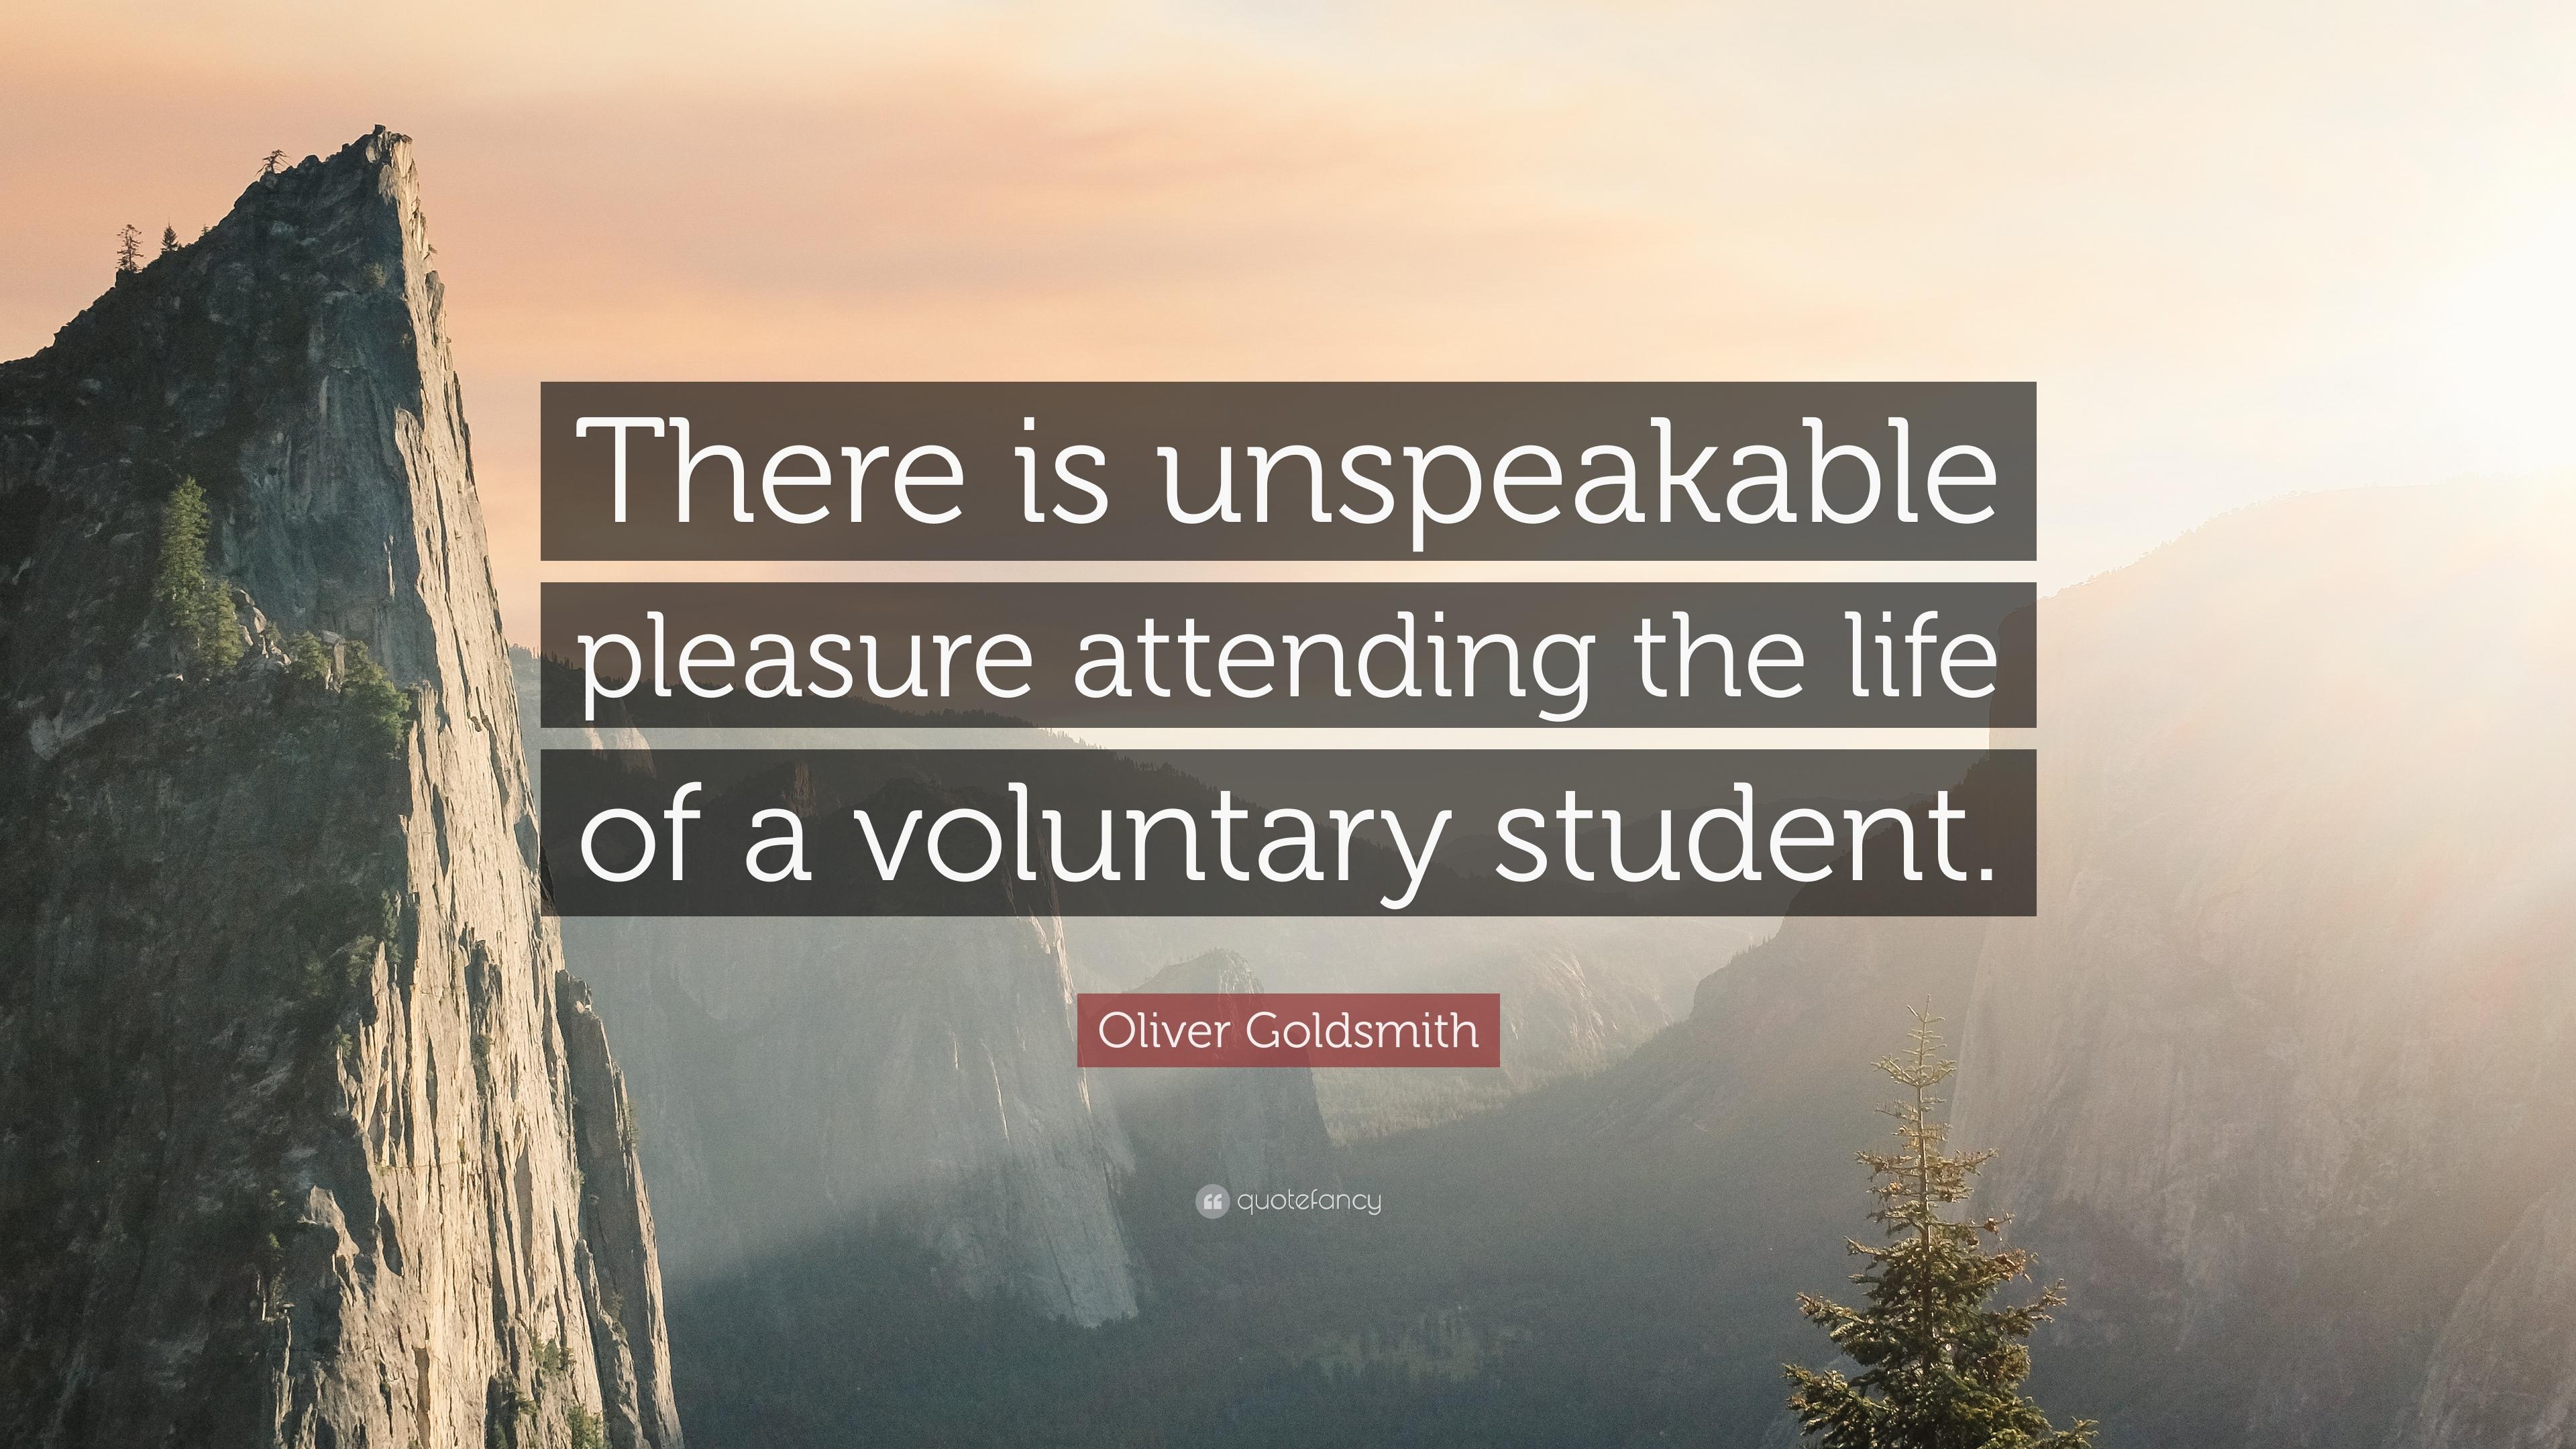 Oliver Goldsmith Quote: “There is unspeakable pleasure attending